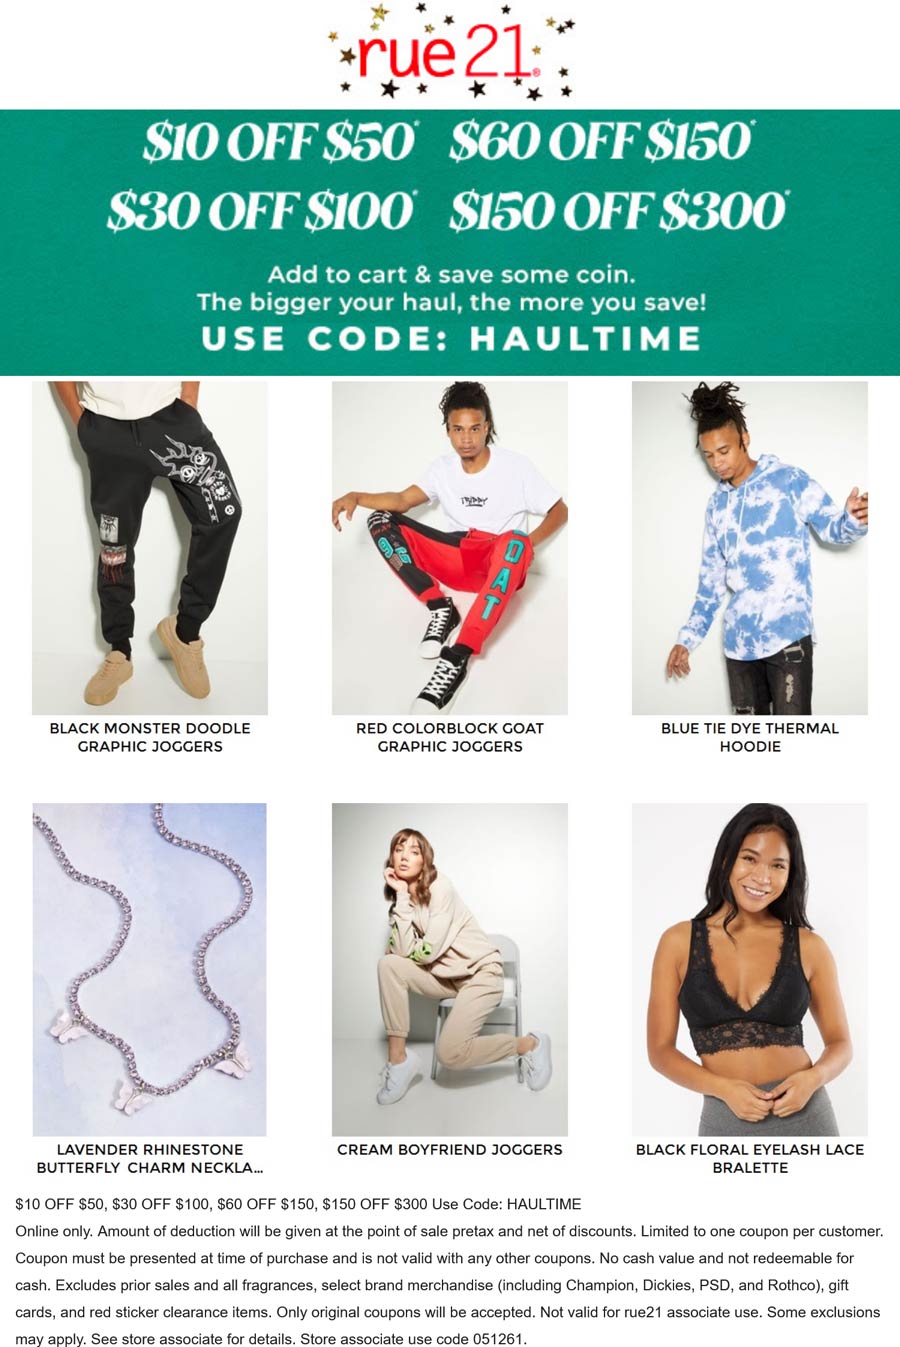 rue21 stores Coupon  $10 off $50 & more at rue21 via promo code HAULTIME #rue21 